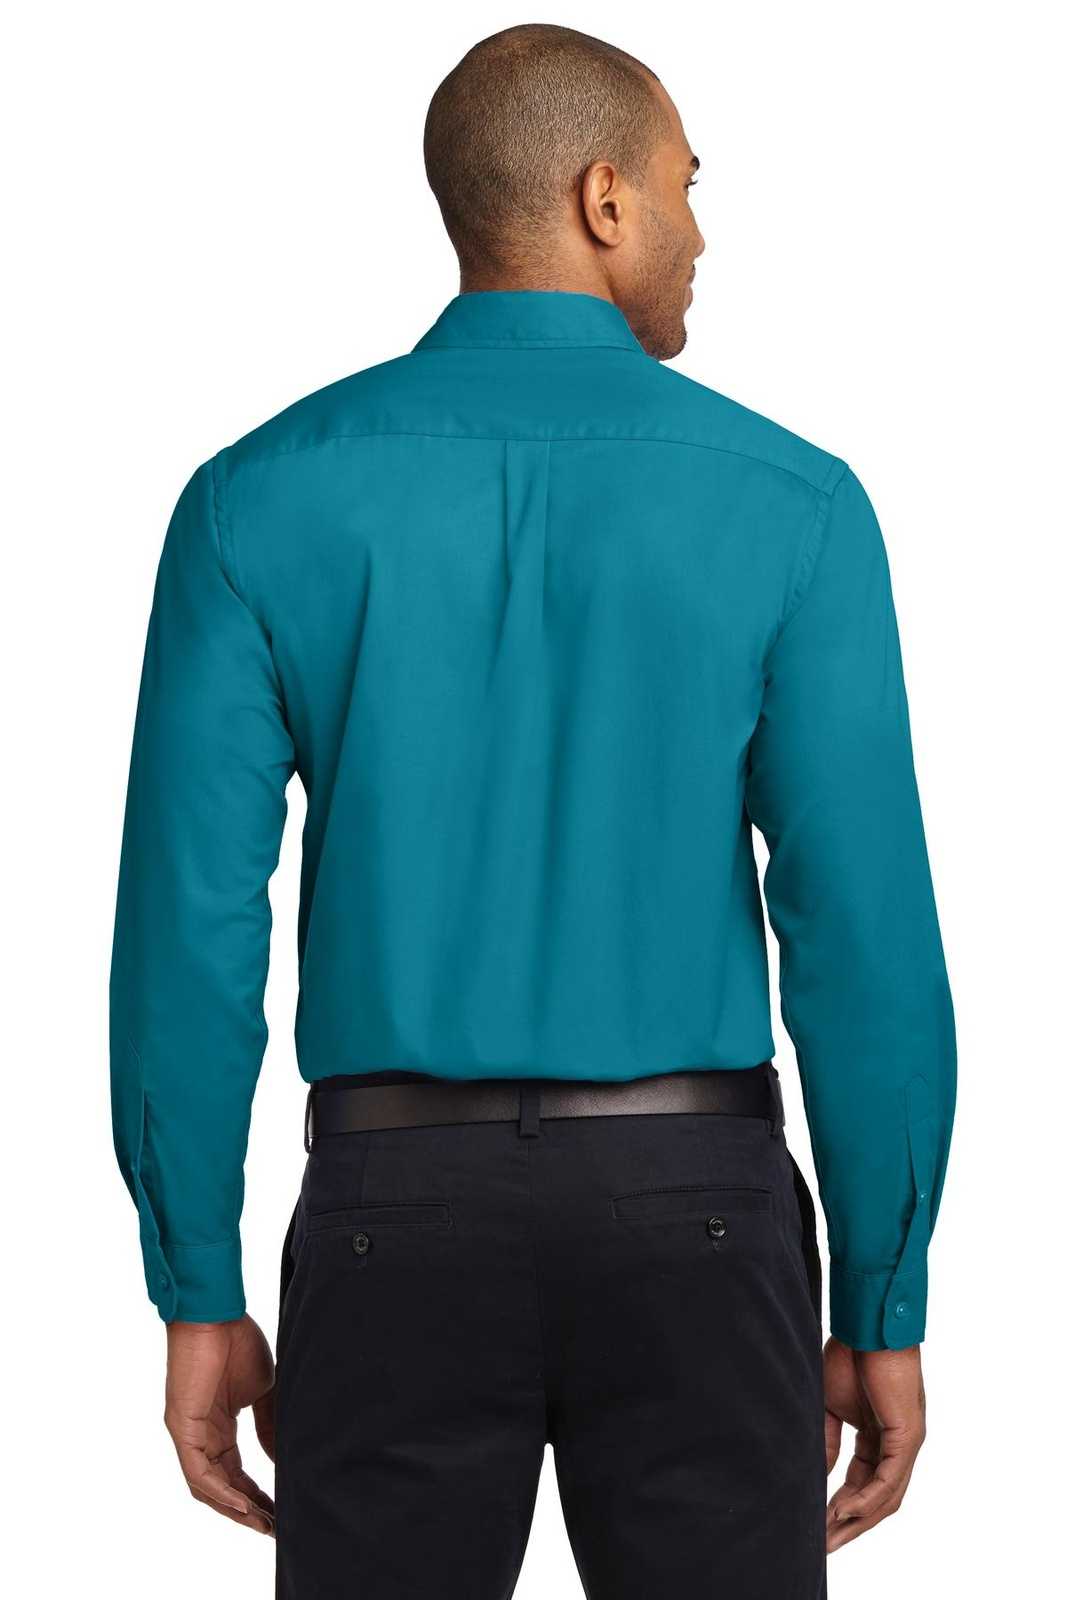 Port Authority S608 Long Sleeve Easy Care Shirt - Teal Green - HIT a Double - 2